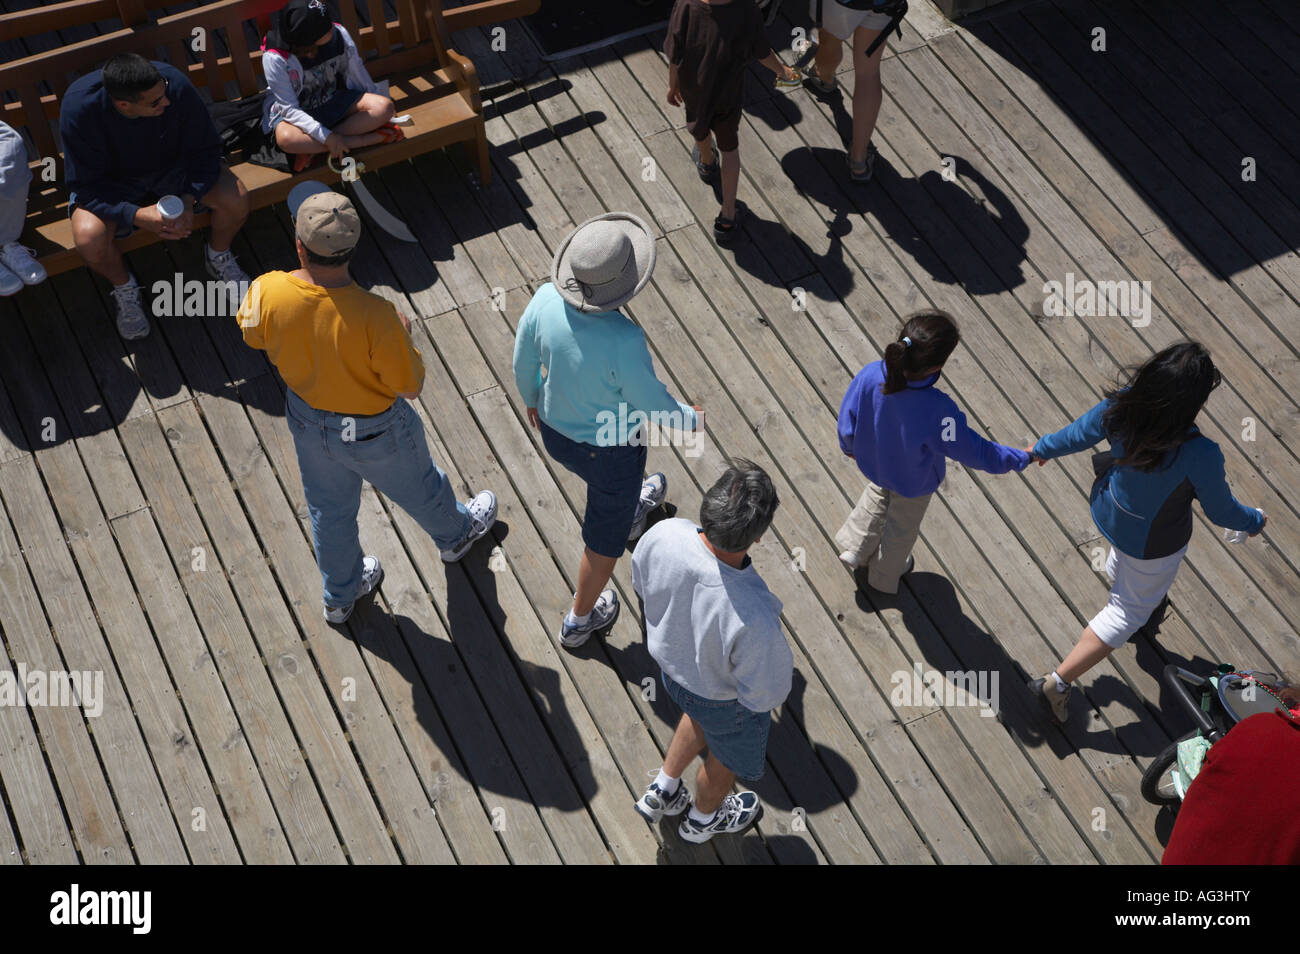 People walking on wooden dock taken from above Stock Photo